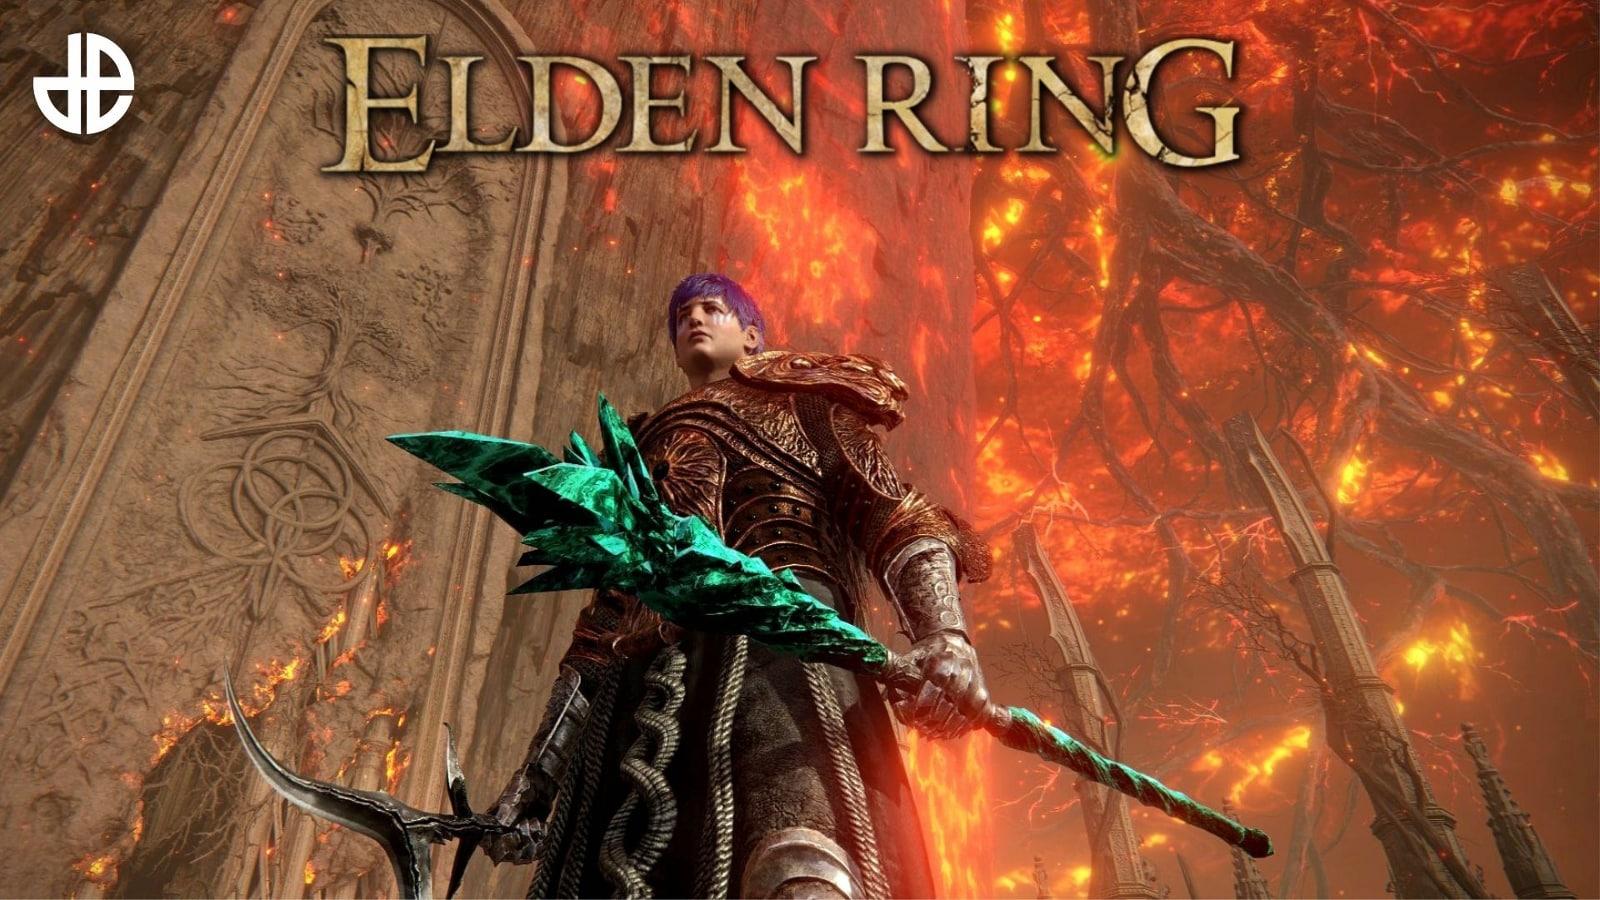 After Elden Ring's DLC, FromSoftware's Next Magical Game Might Be